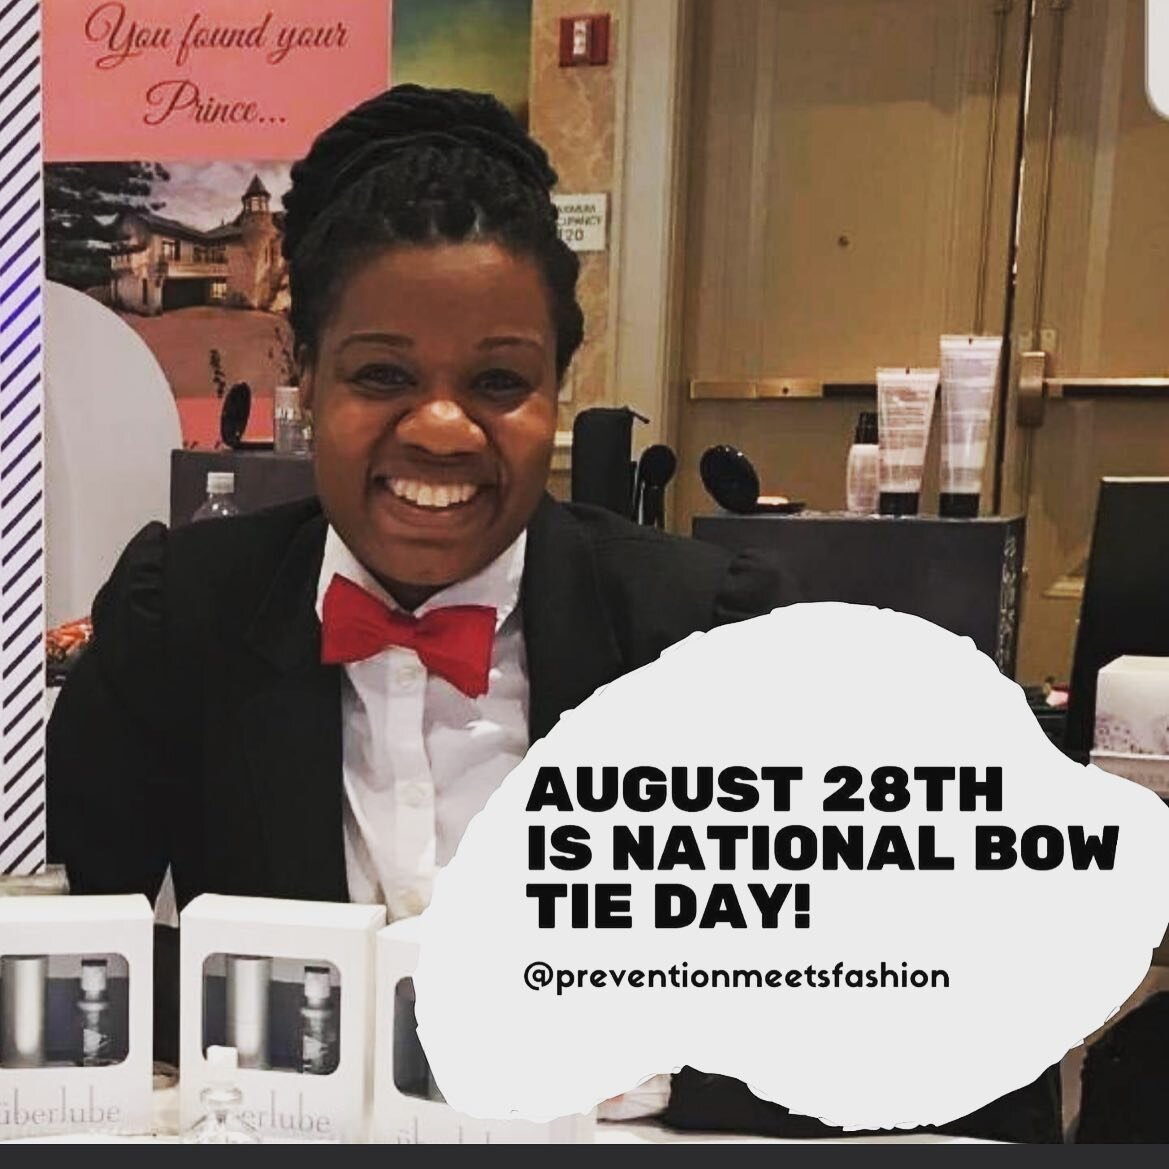 Happy National Bow Tie Day!

Are you a #bowtie lover? #preventionmeetsfashion #nationalbowtieday